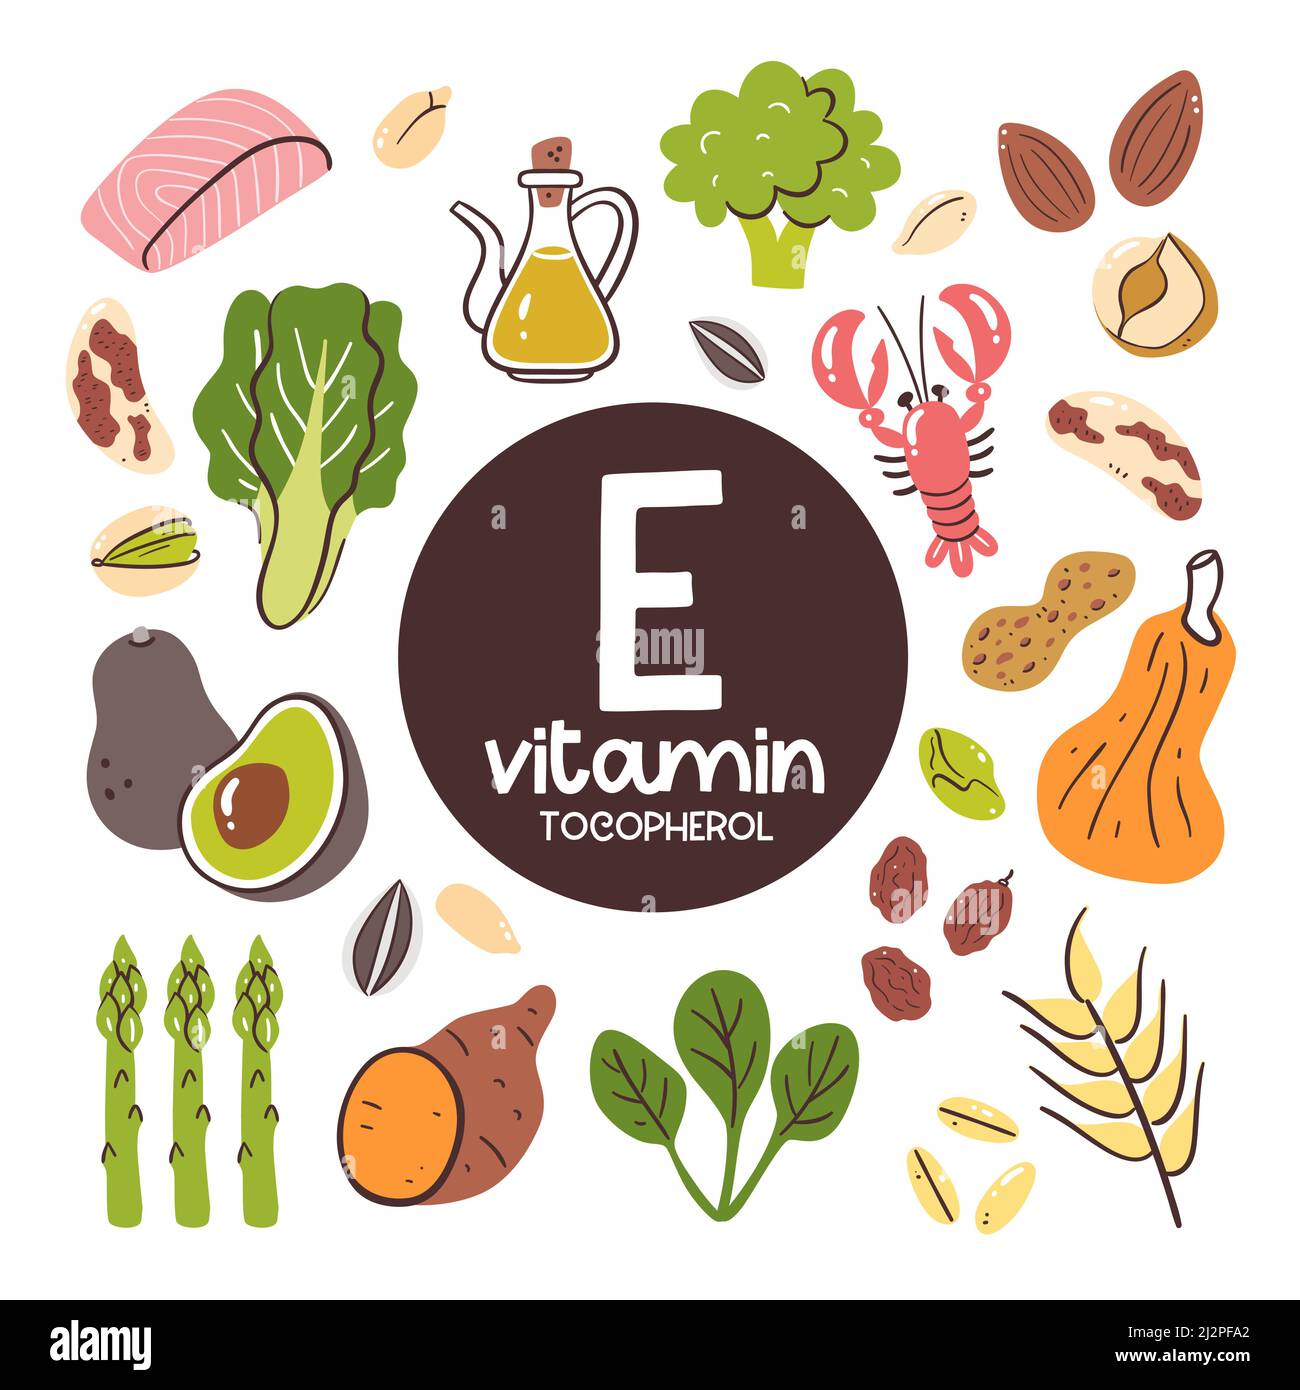 Food products with high level of Vitamin E (Tocopherol). Cooking ingredients. Seafood, vegetables, nuts, grain. Stock Vector